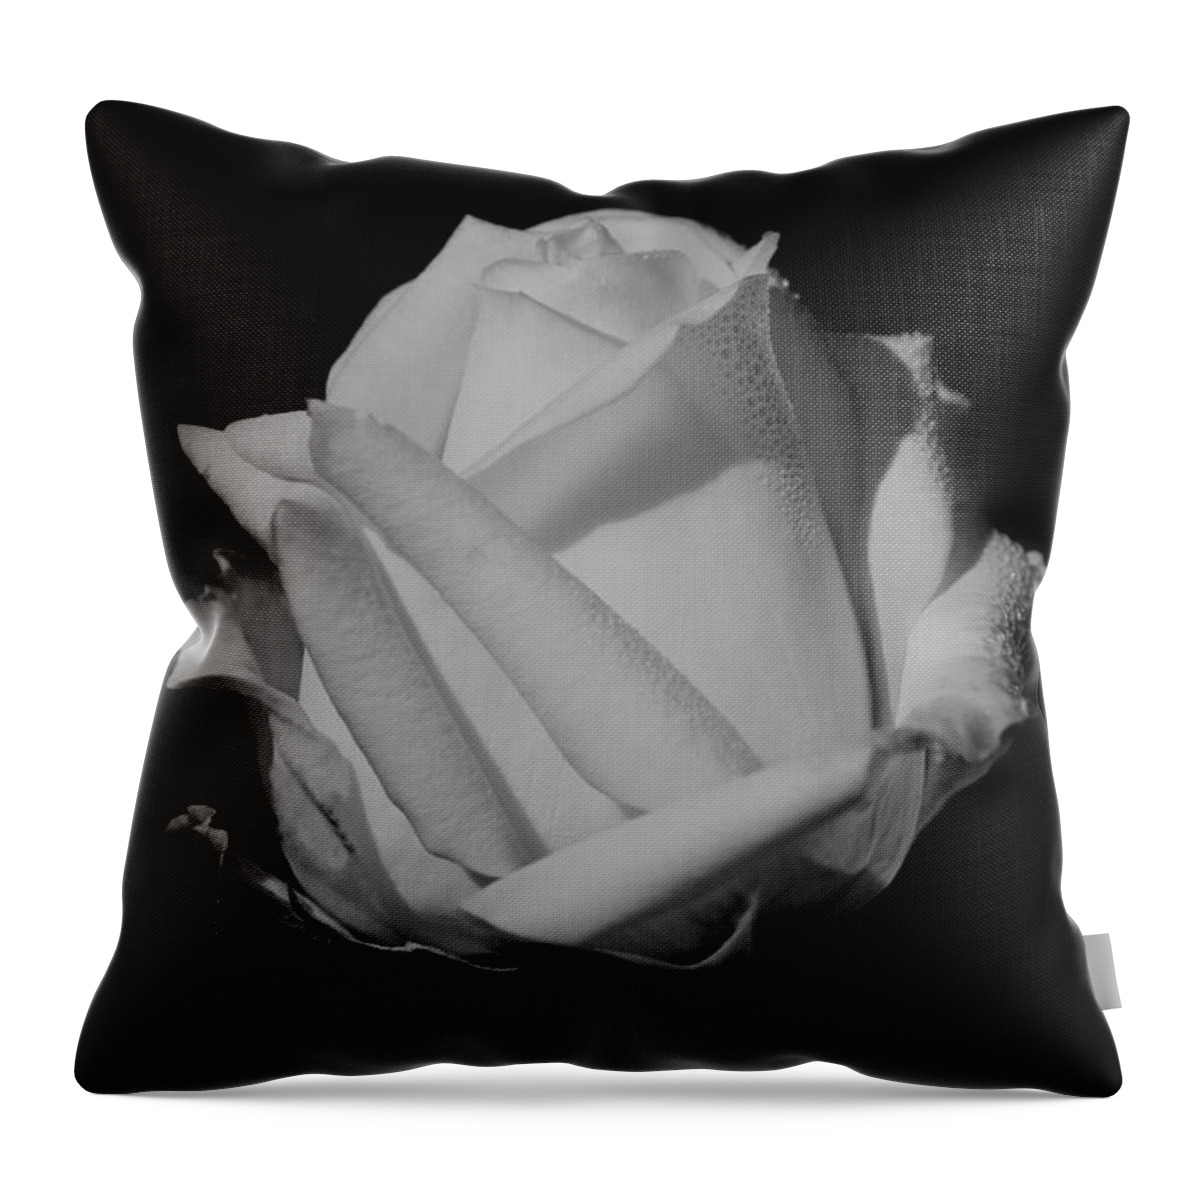 White Rose Throw Pillow featuring the photograph White Rose by Michelle Joseph-Long